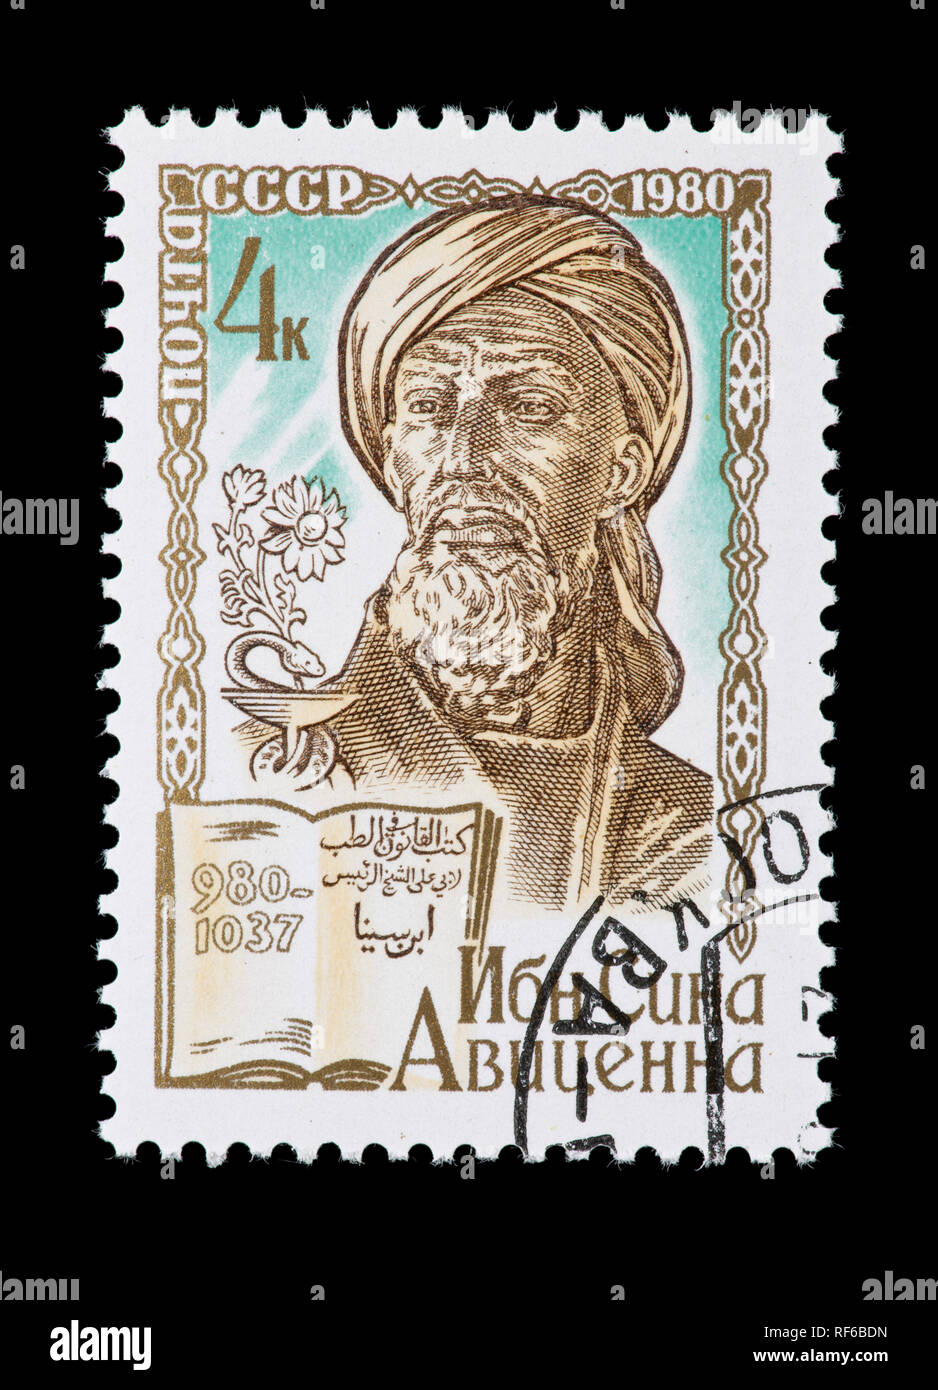 Postage stamp from the Soviet Union (USSR) depicting Avicenna, philosopher and physician. Stock Photo